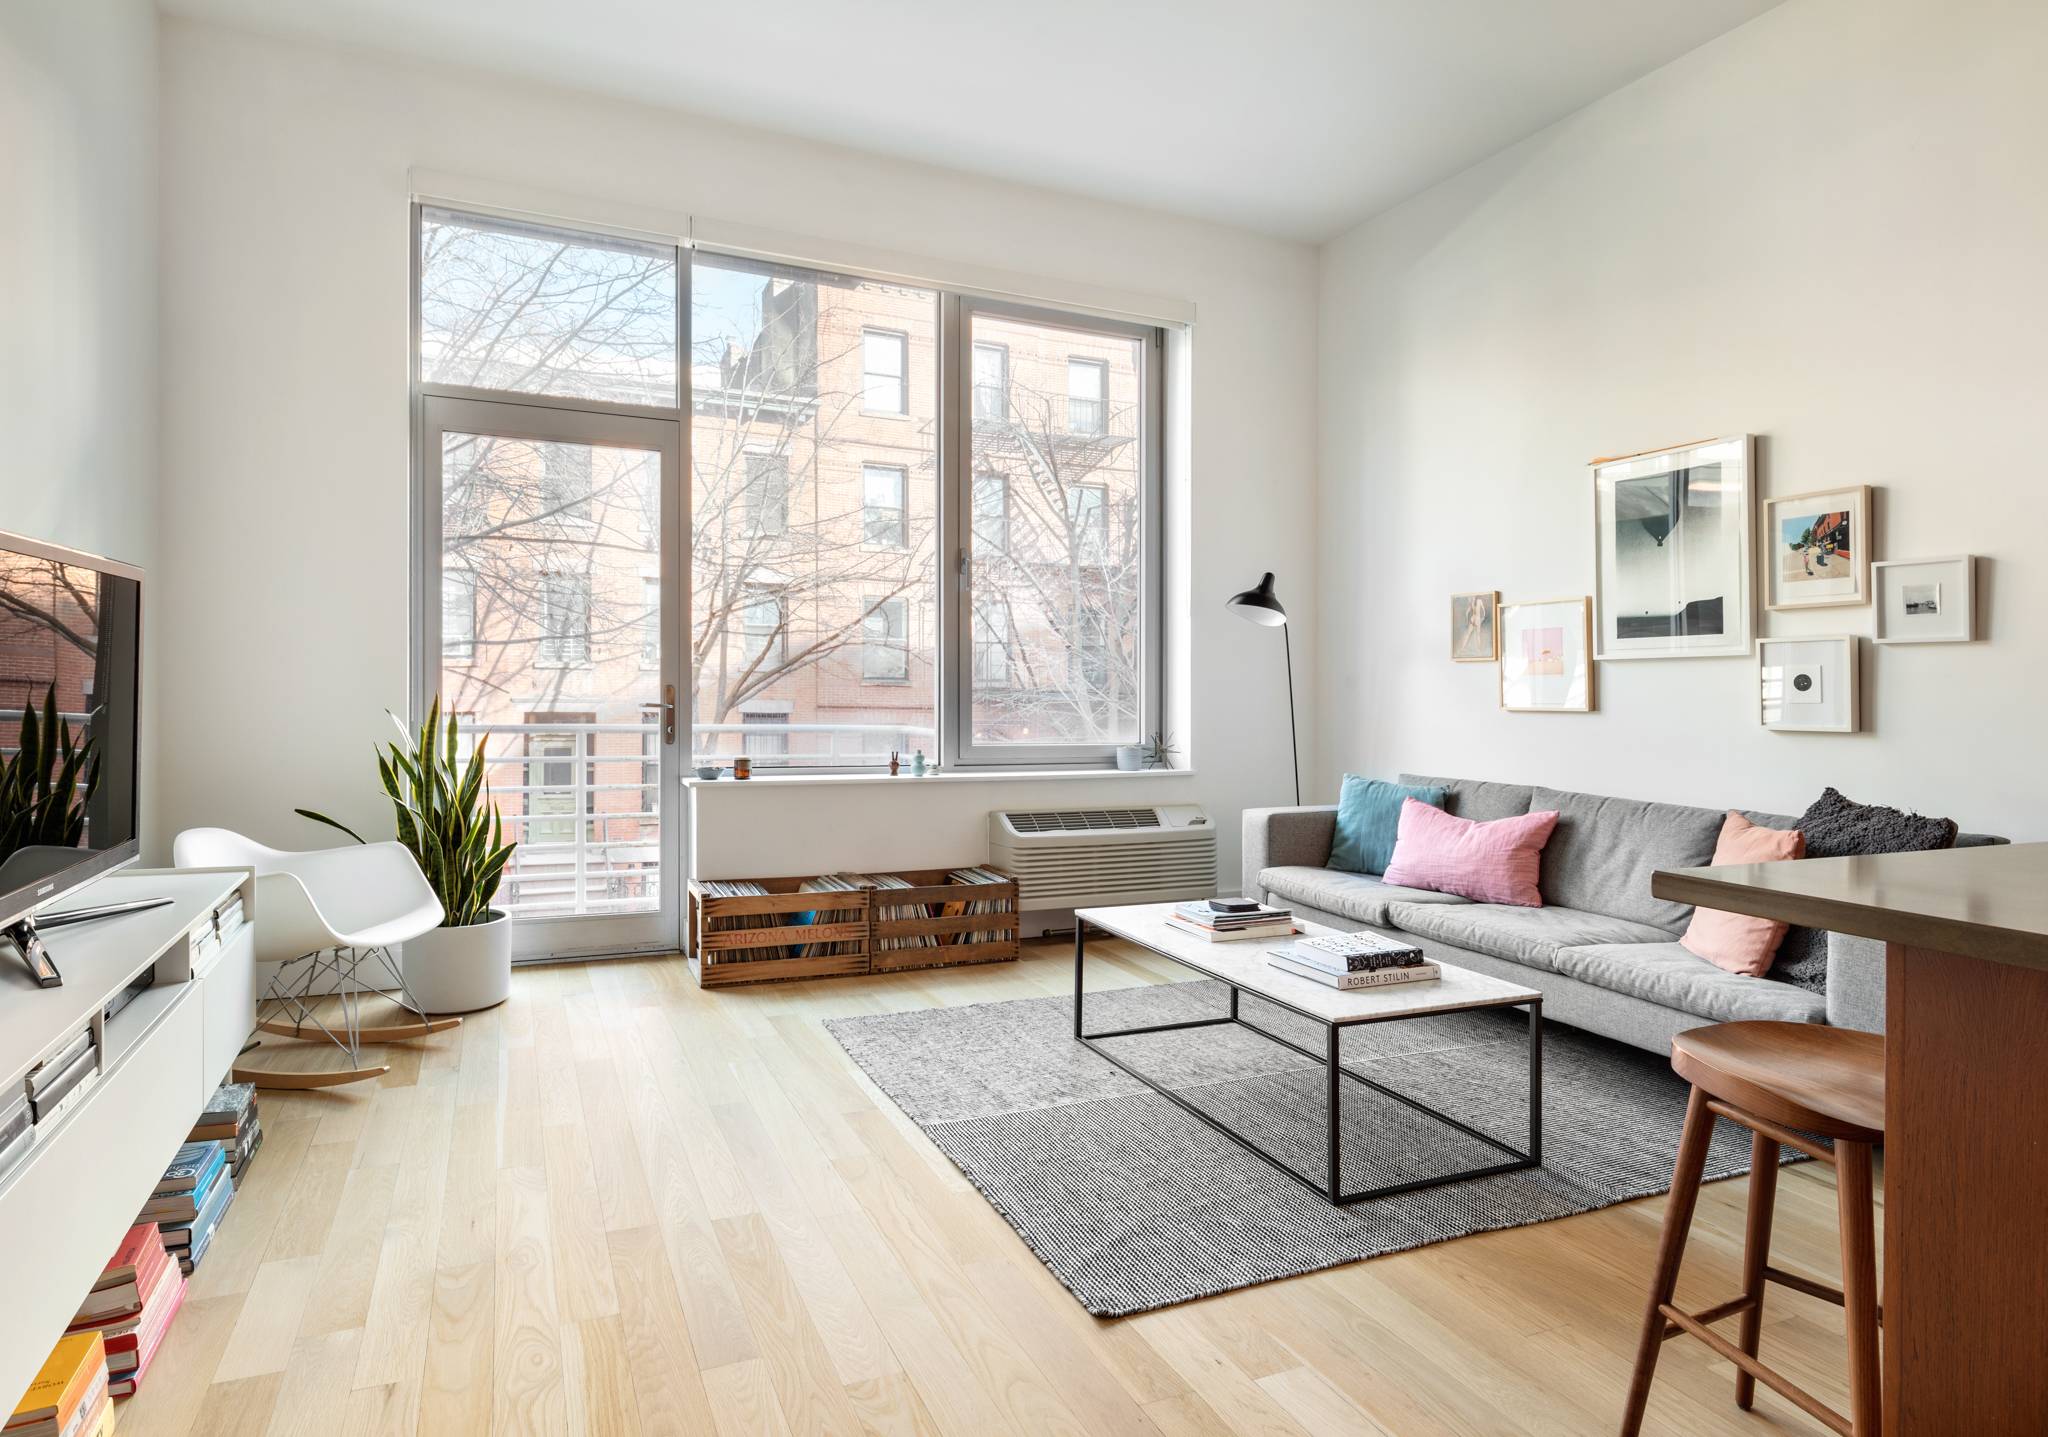 Located in Downtown Brooklyn, in the center of it all, is this bright and modern condo.